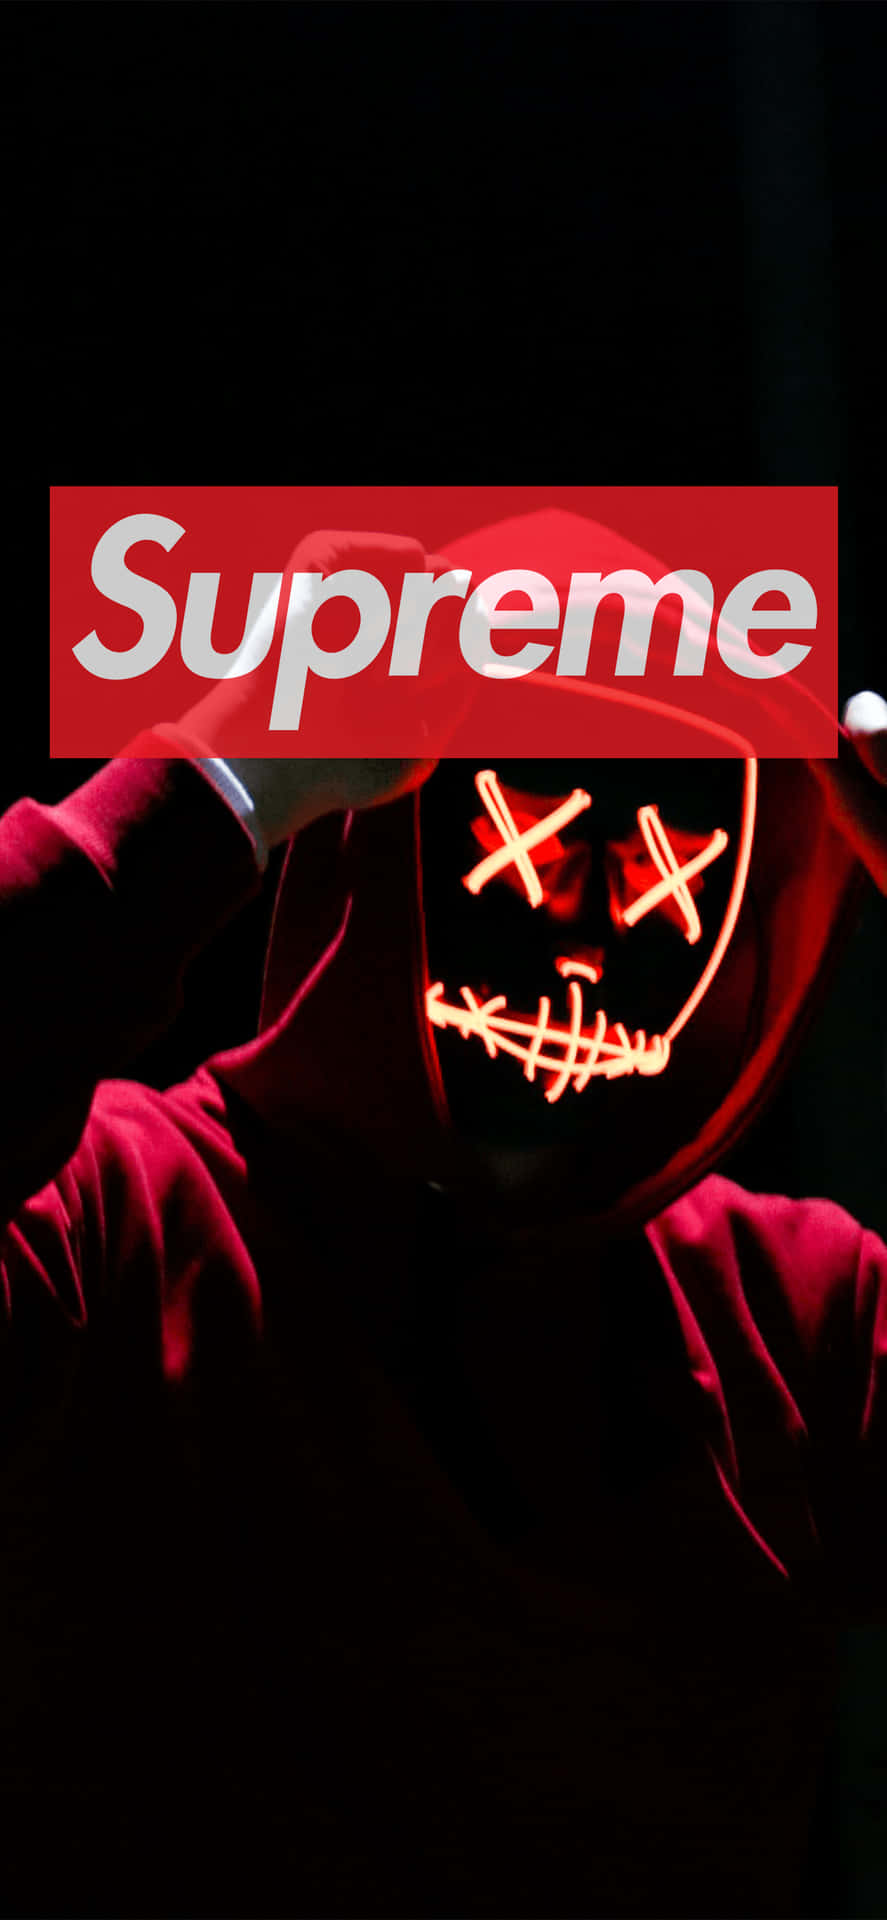 Supreme Logo in Red and White Wallpaper